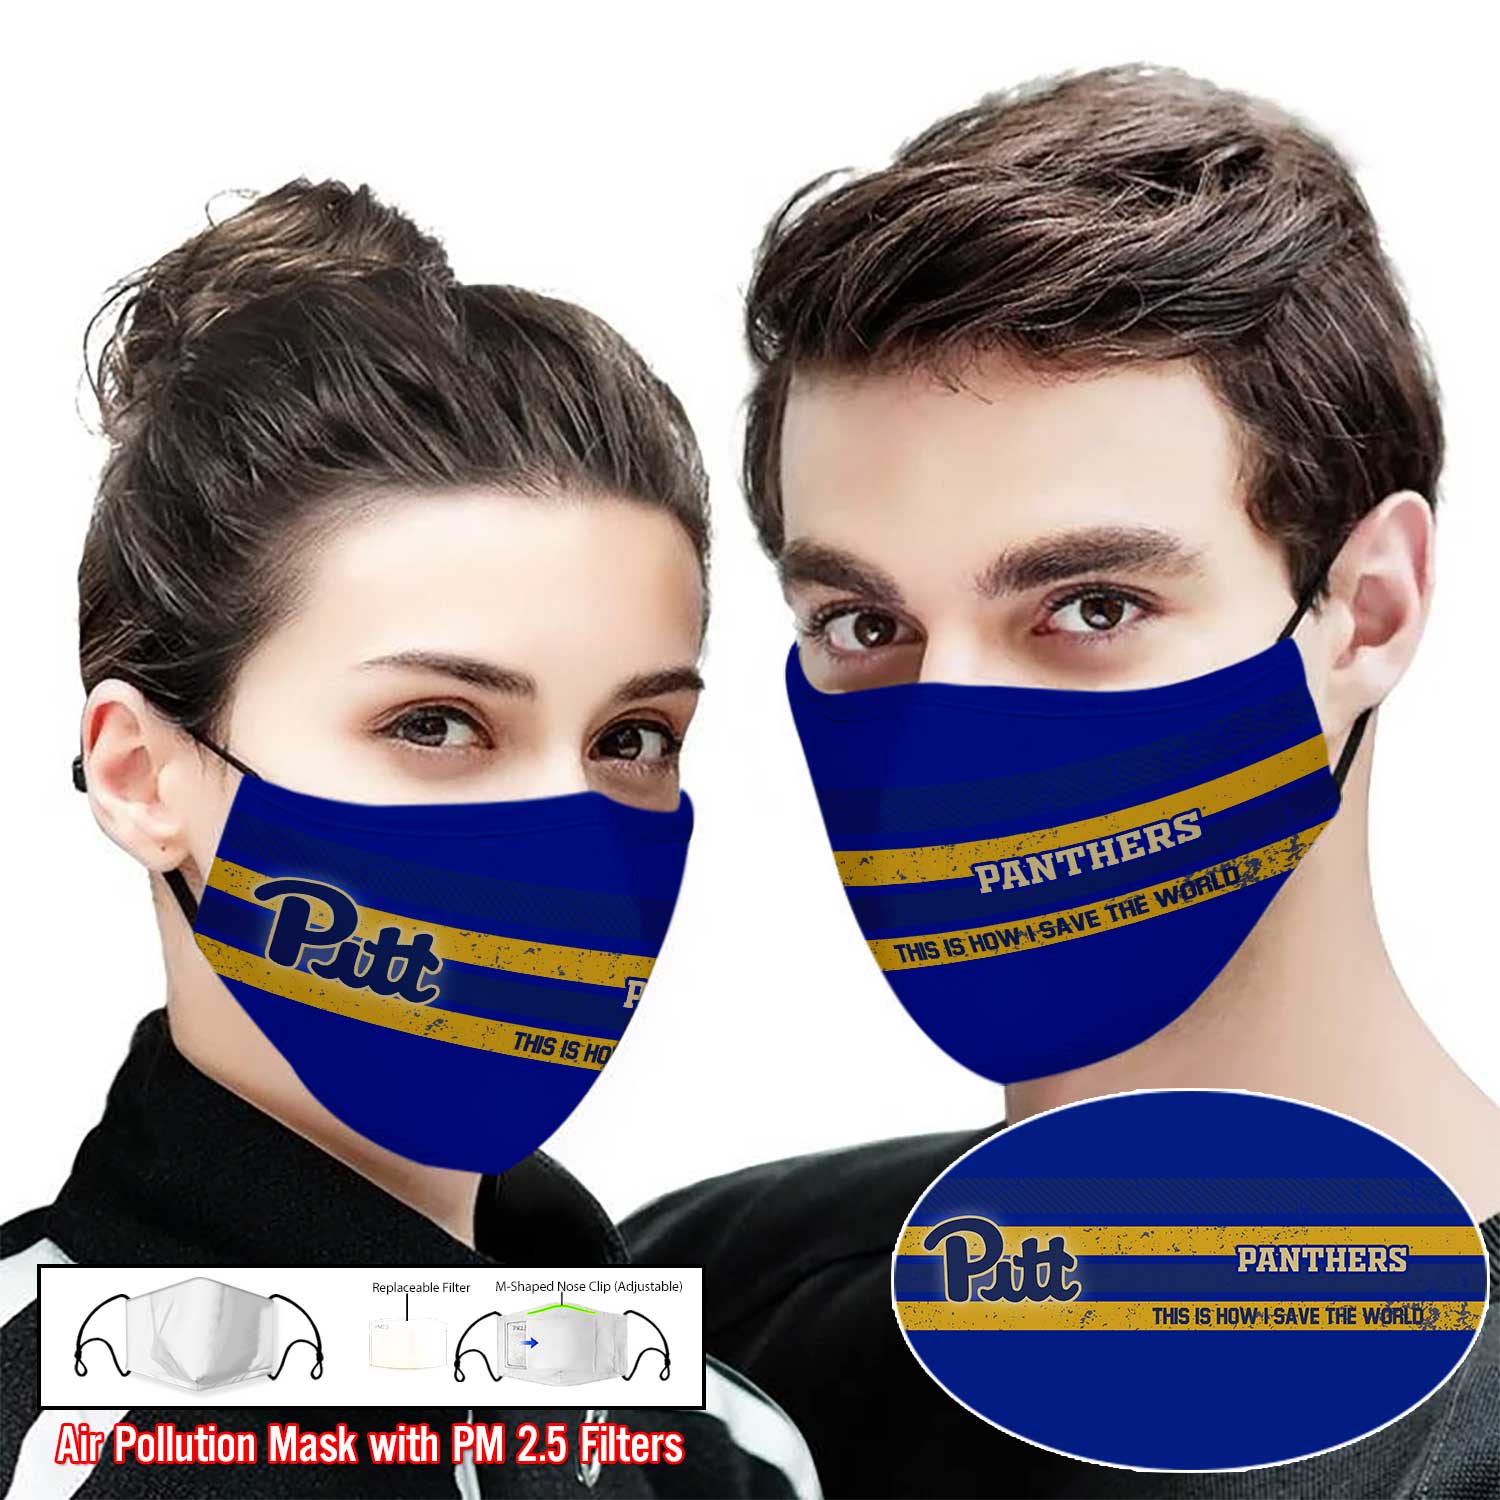 Pitt panthers this is how i save the world face mask